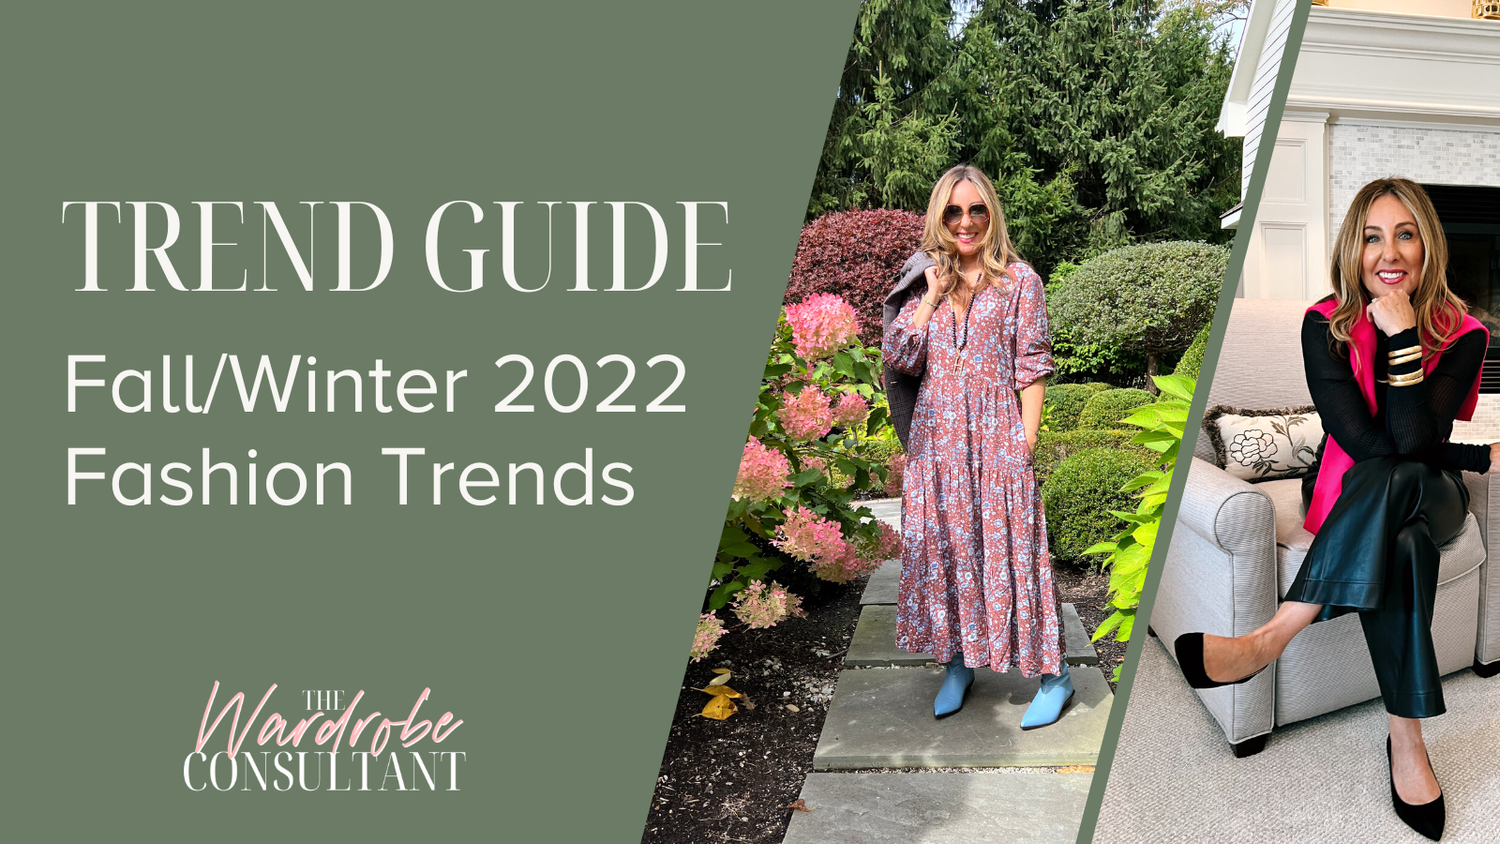 3 women's fashion trends for spring 2022 - Camberwell Junction